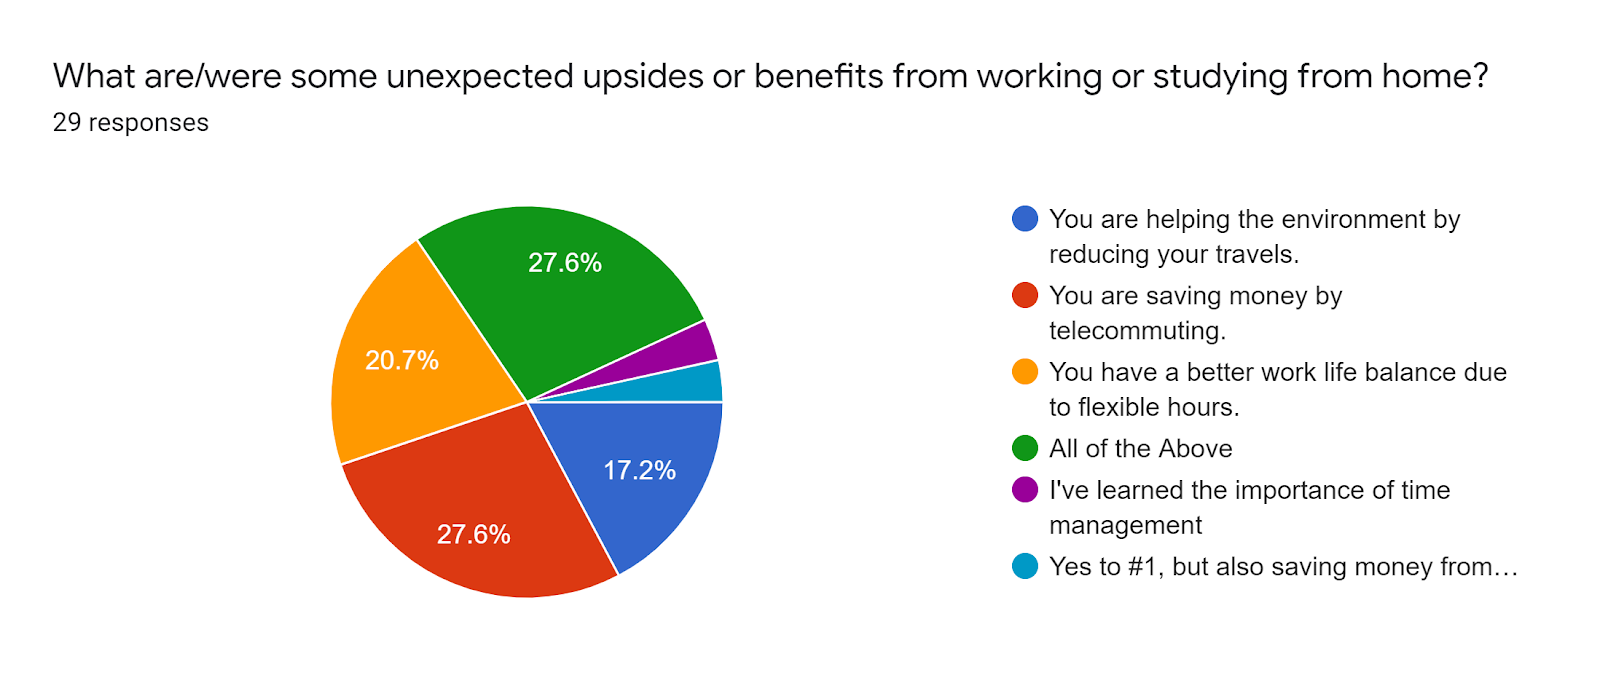 Forms response chart. Question title: What are/were some unexpected upsides or benefits from working or studying from home?. Number of responses: 29 responses.